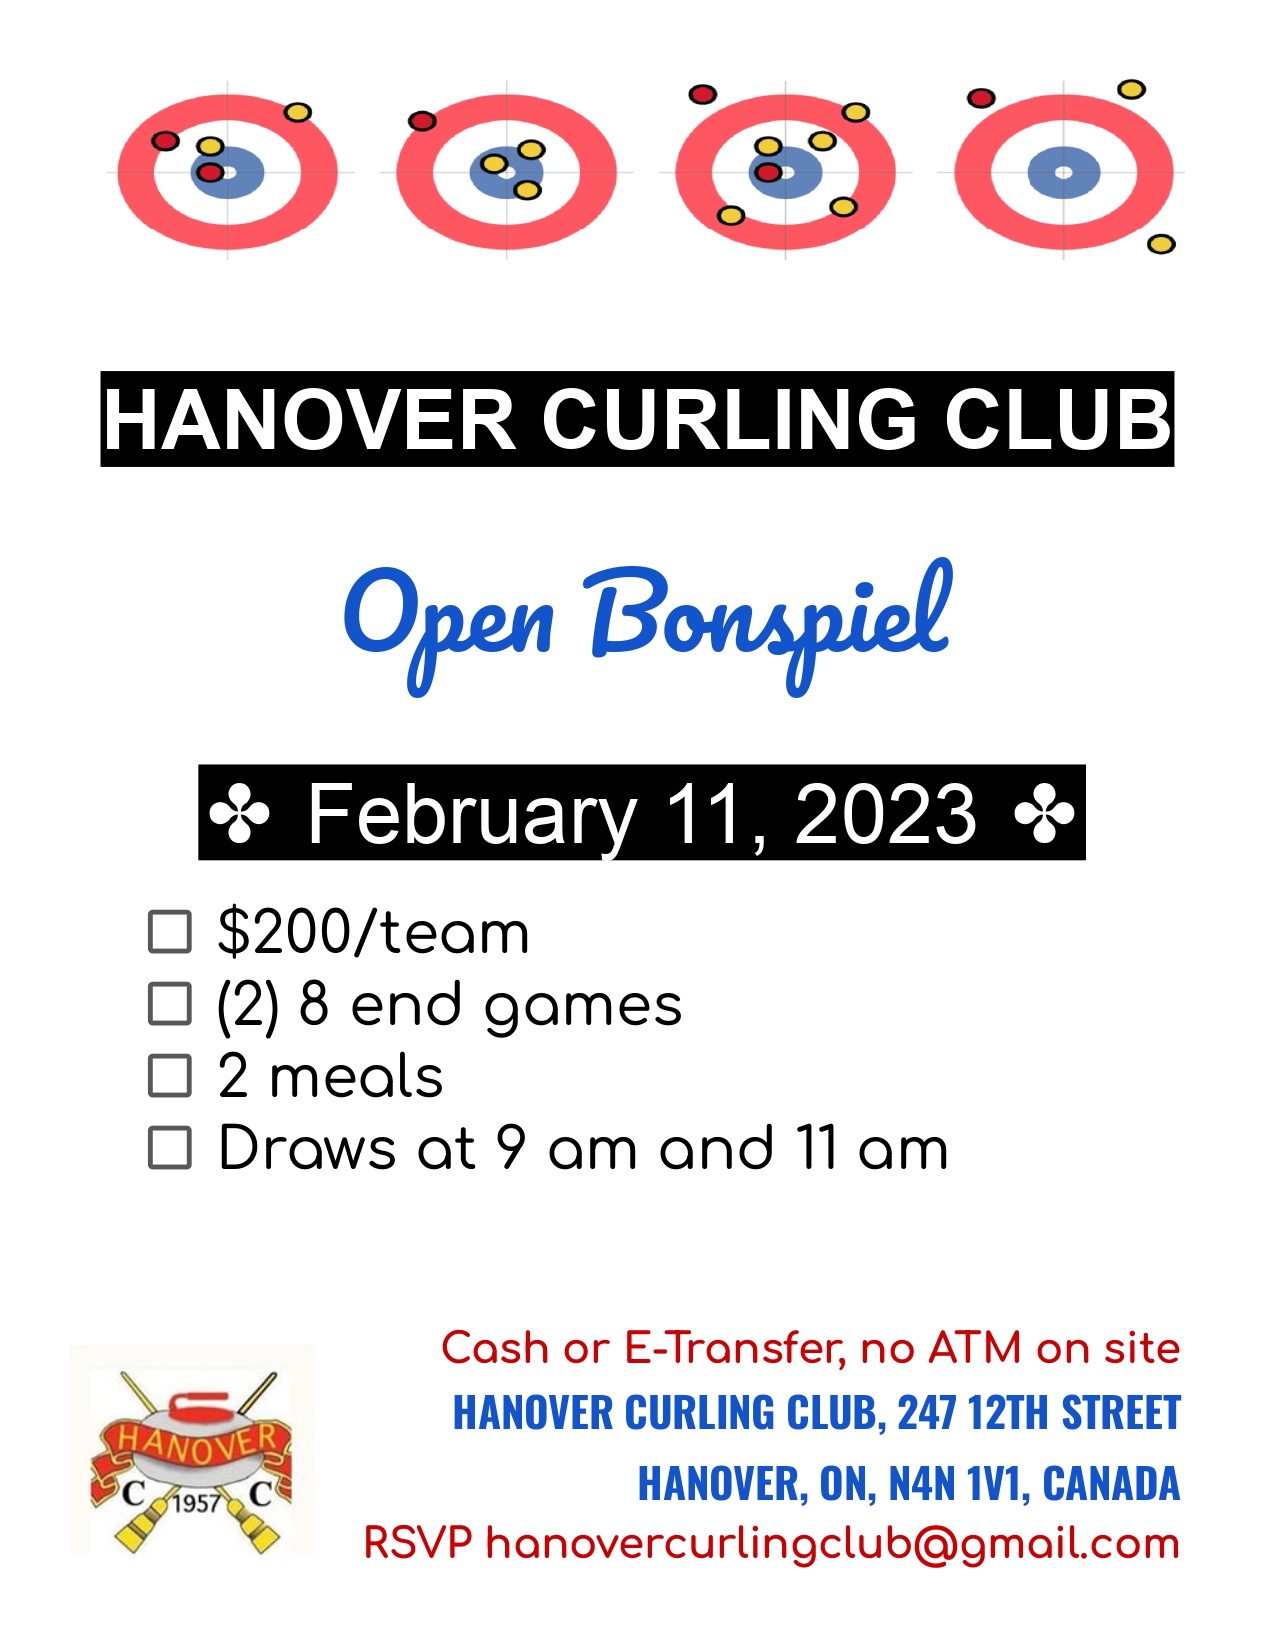 2023 Open Bonspiel Hanover Curling Club page 0001